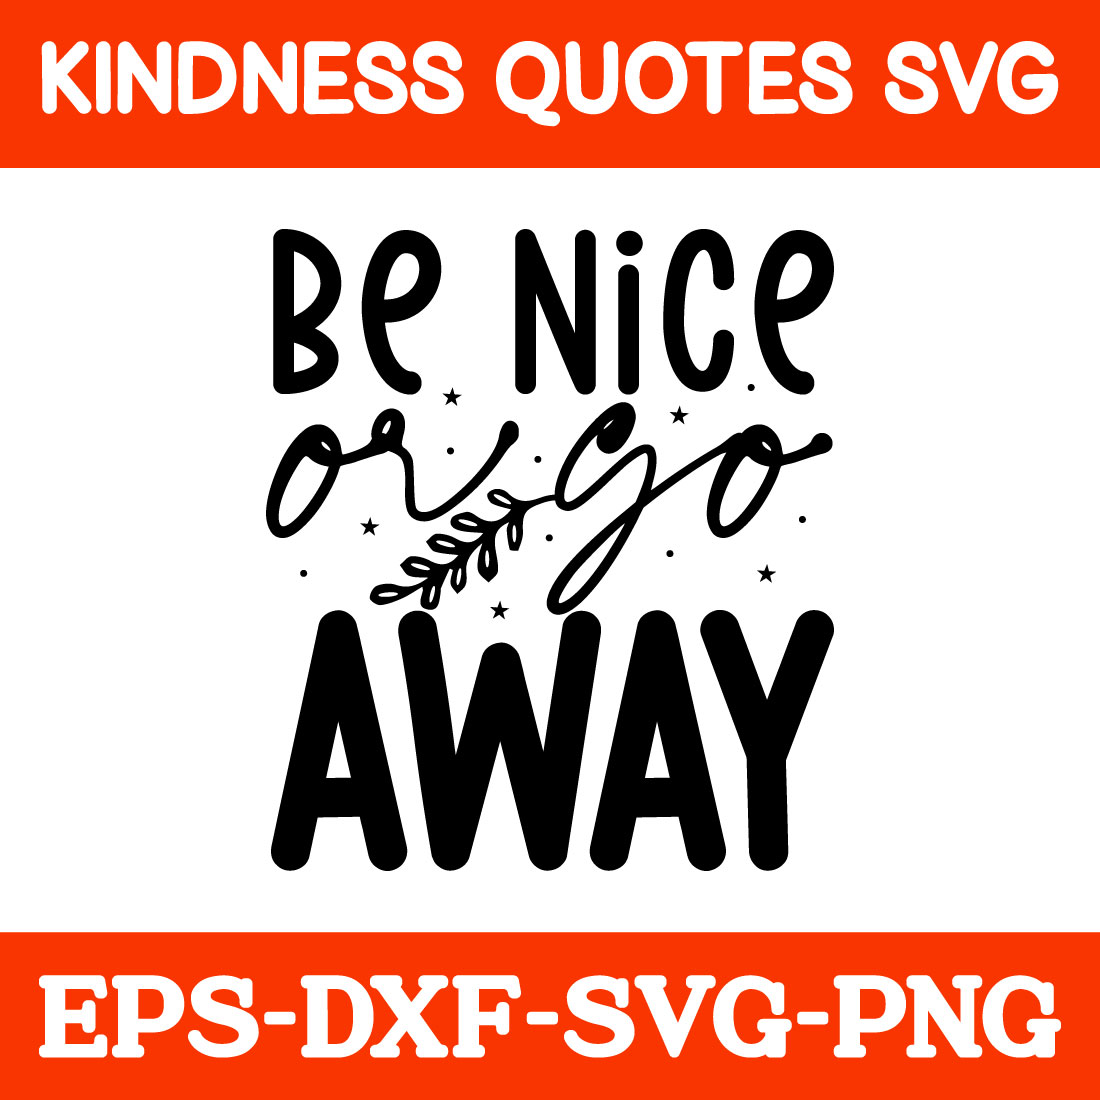 Kindness Quotes Svg preview image.